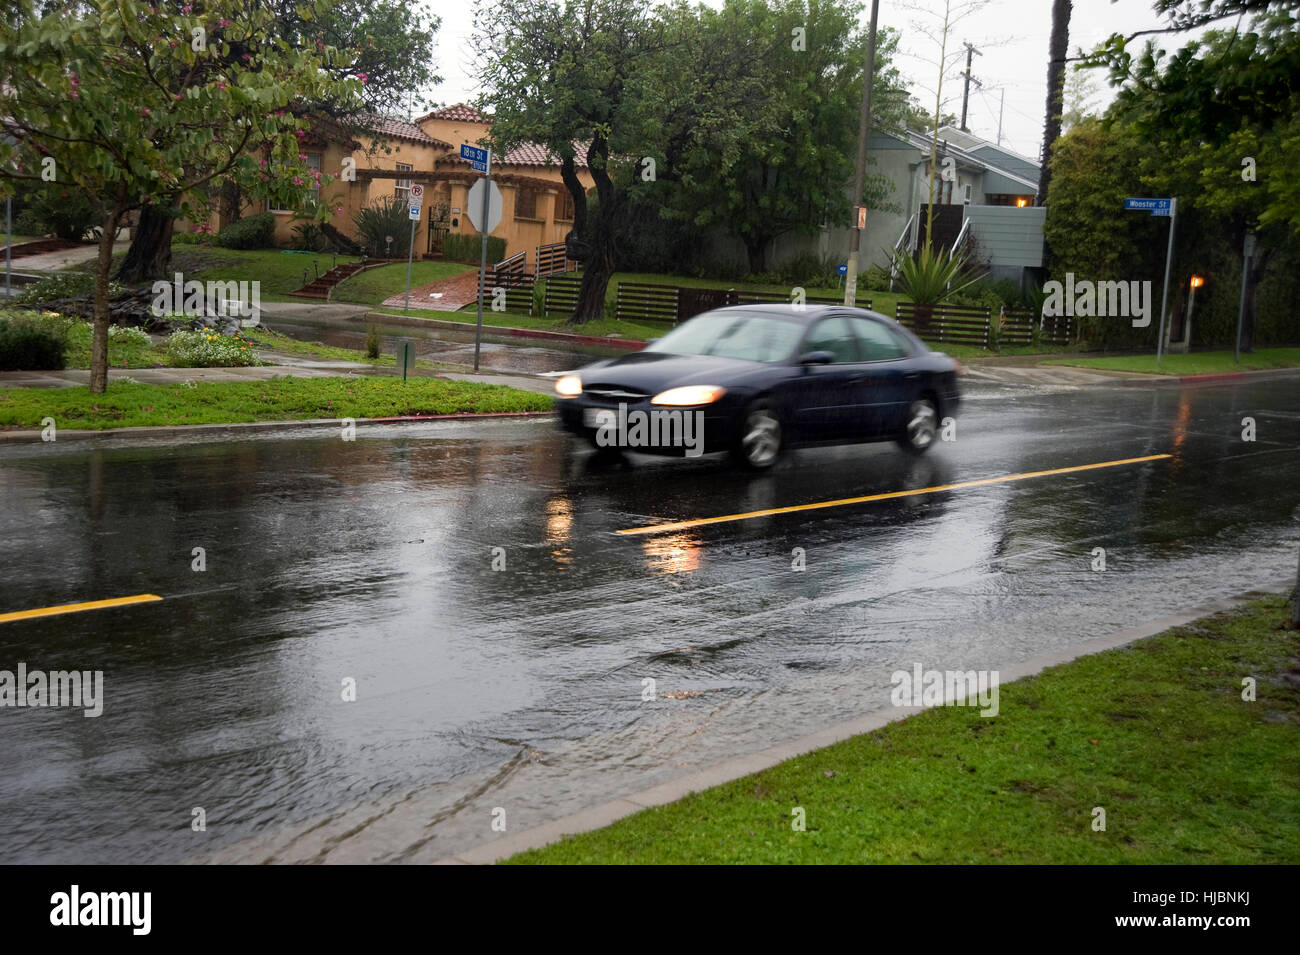 Car driving in rain on wet streets Stock Photo